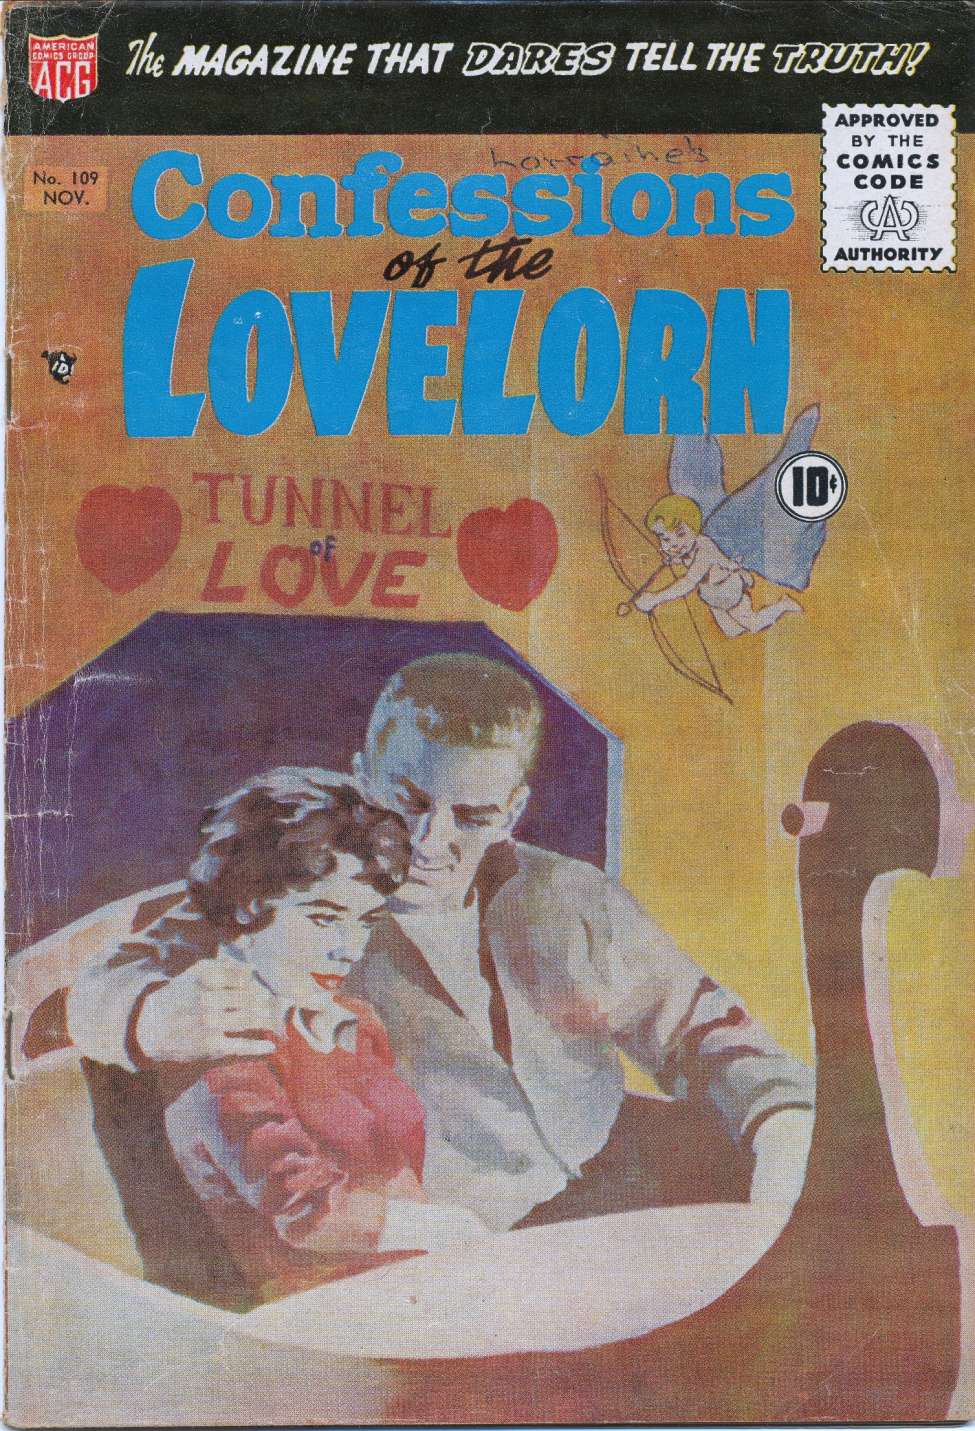 Comic Book Cover For Confessions of the Lovelorn 109